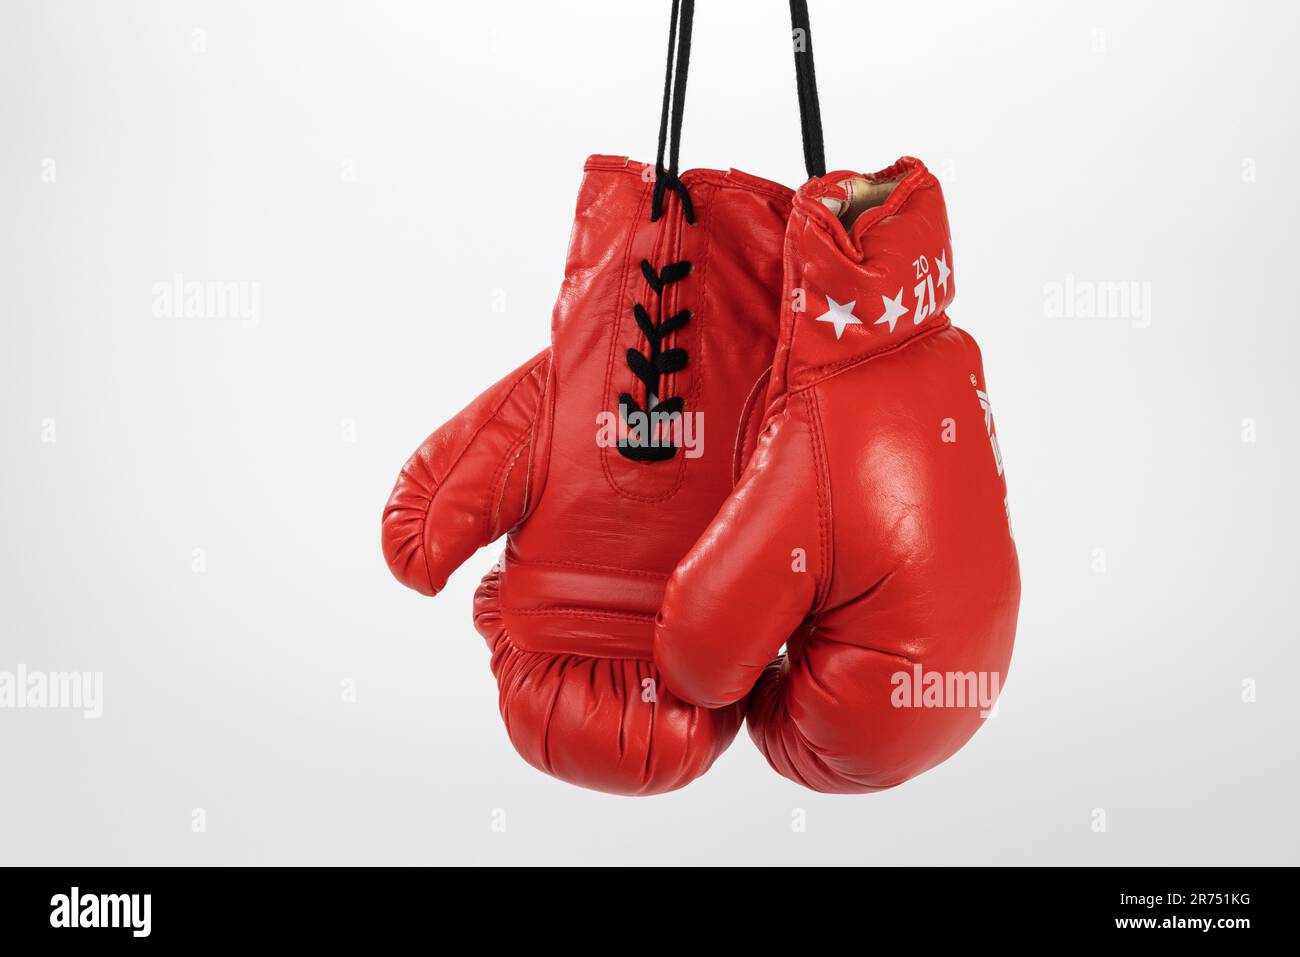 Pair of red boxing gloves hung on lace, white background, Stock Photo